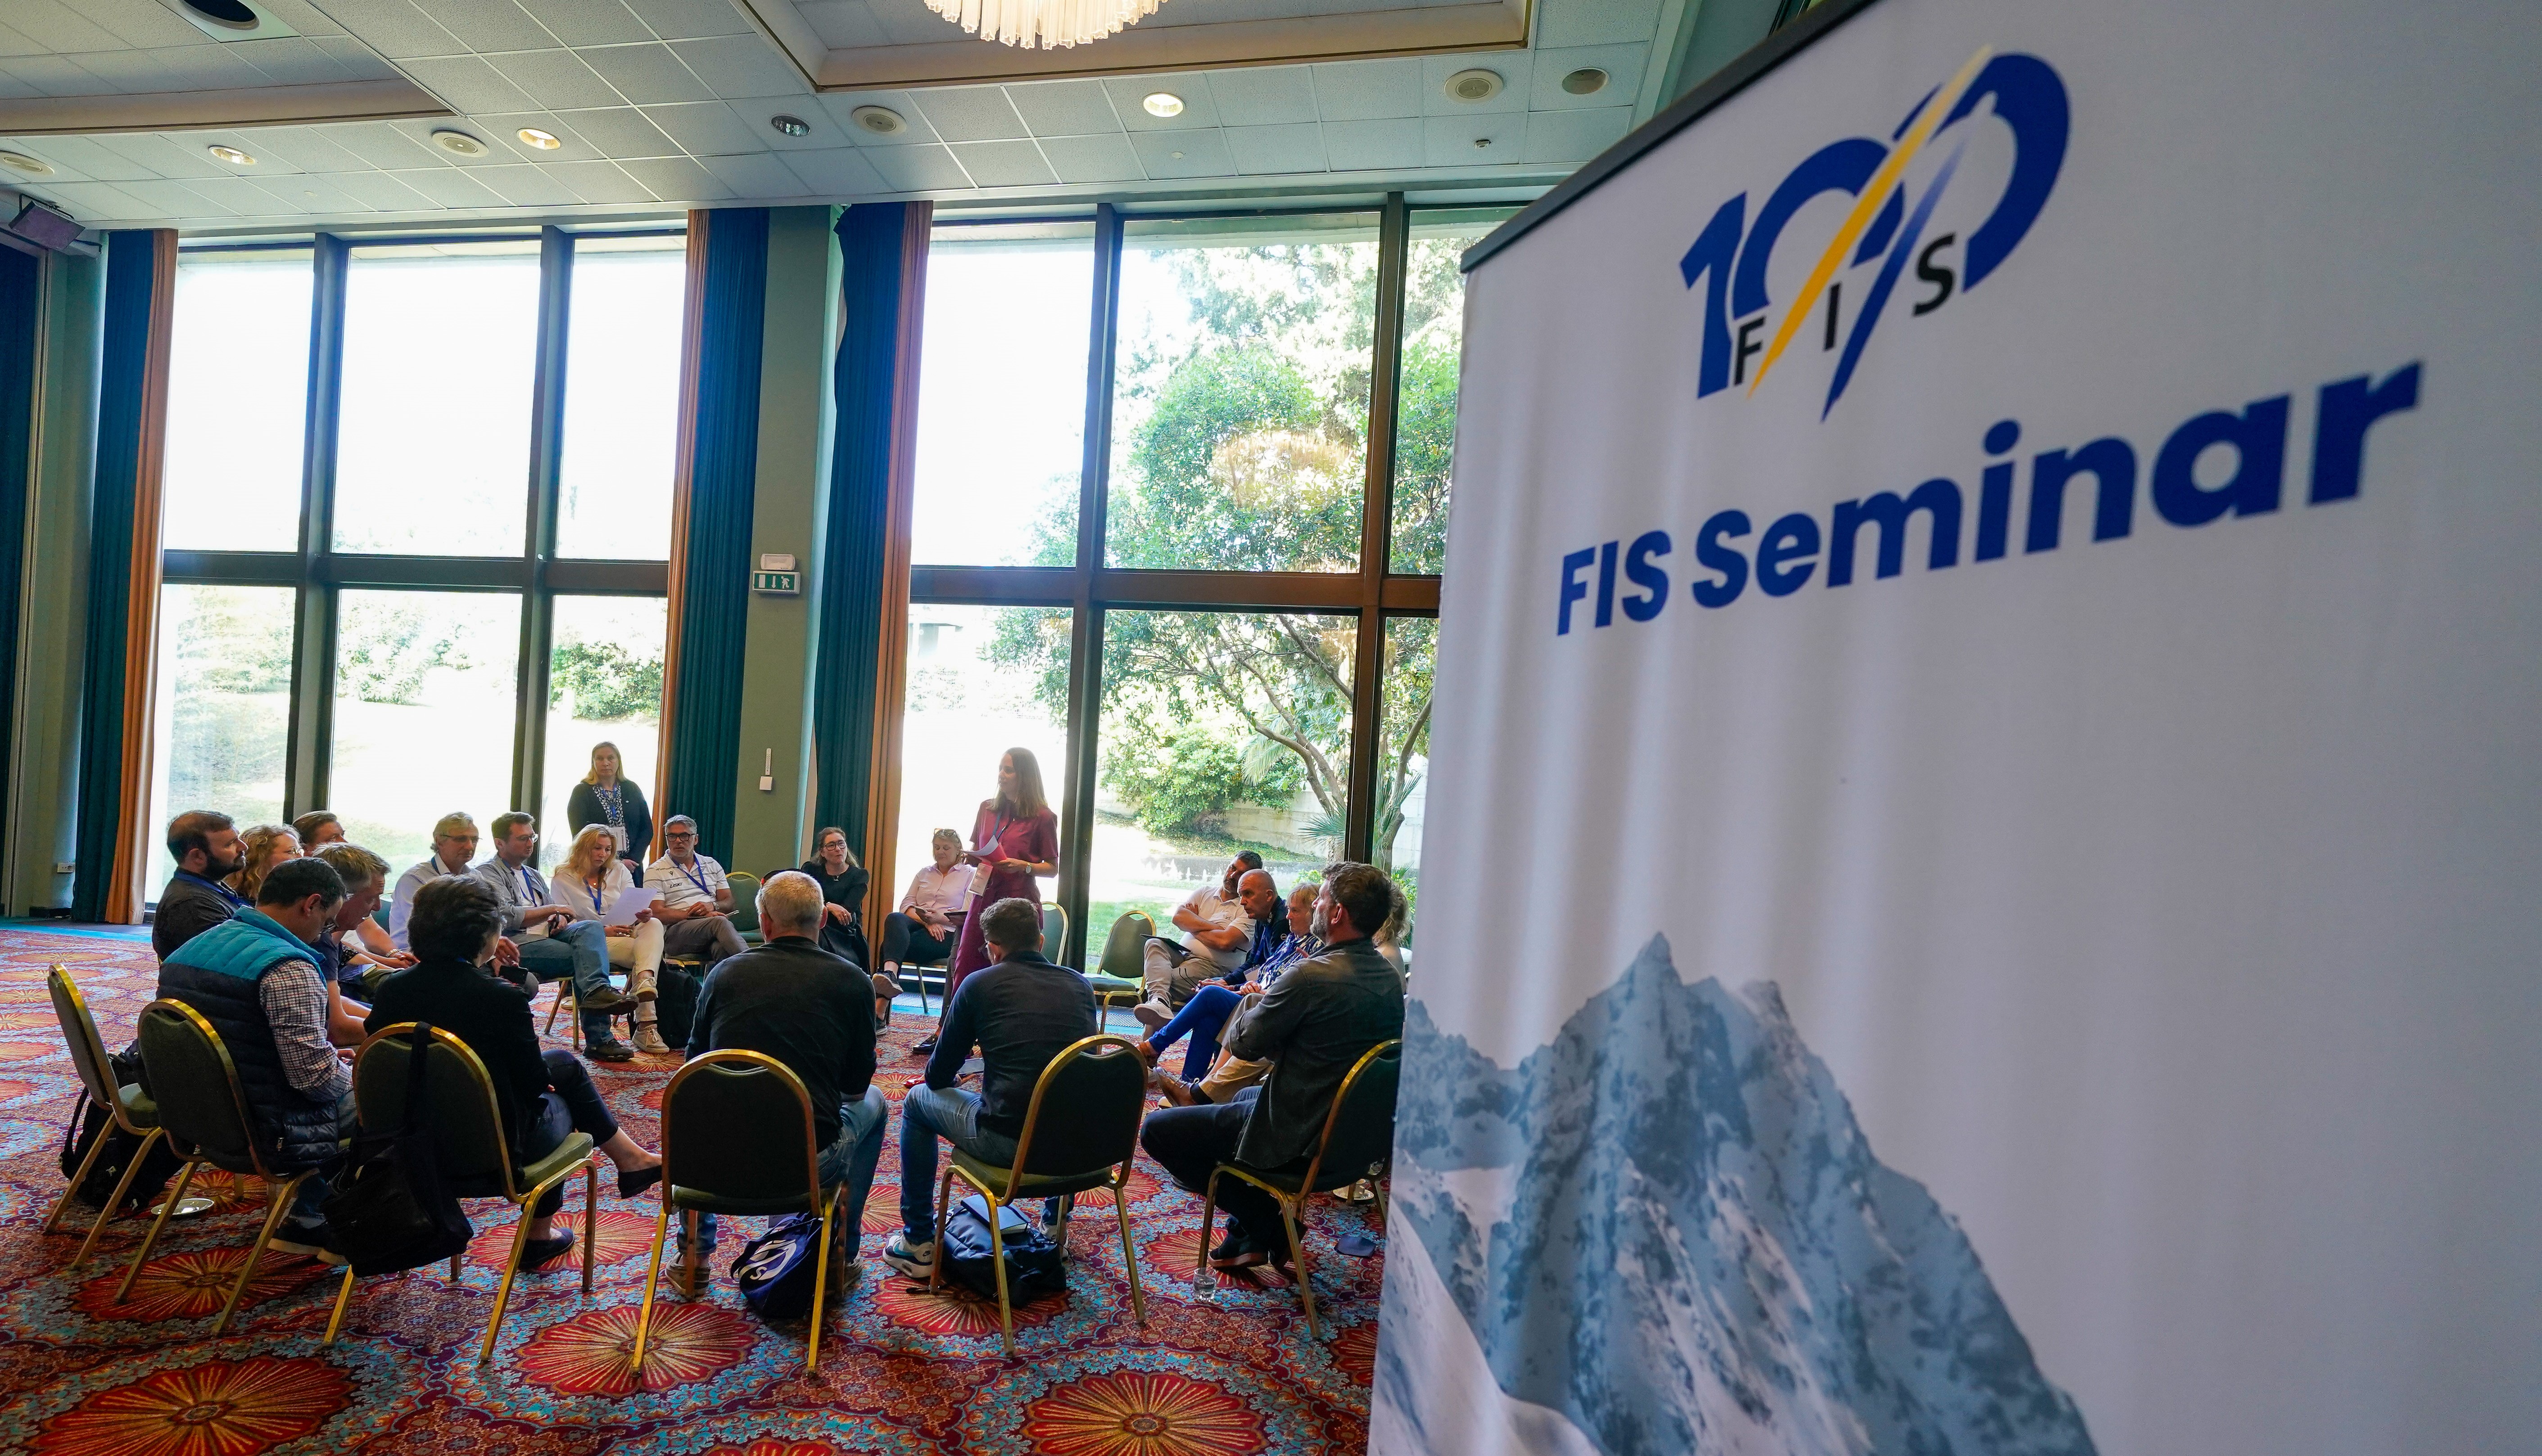 The first FIS Seminar highlights the intersection of snow sports and human rights